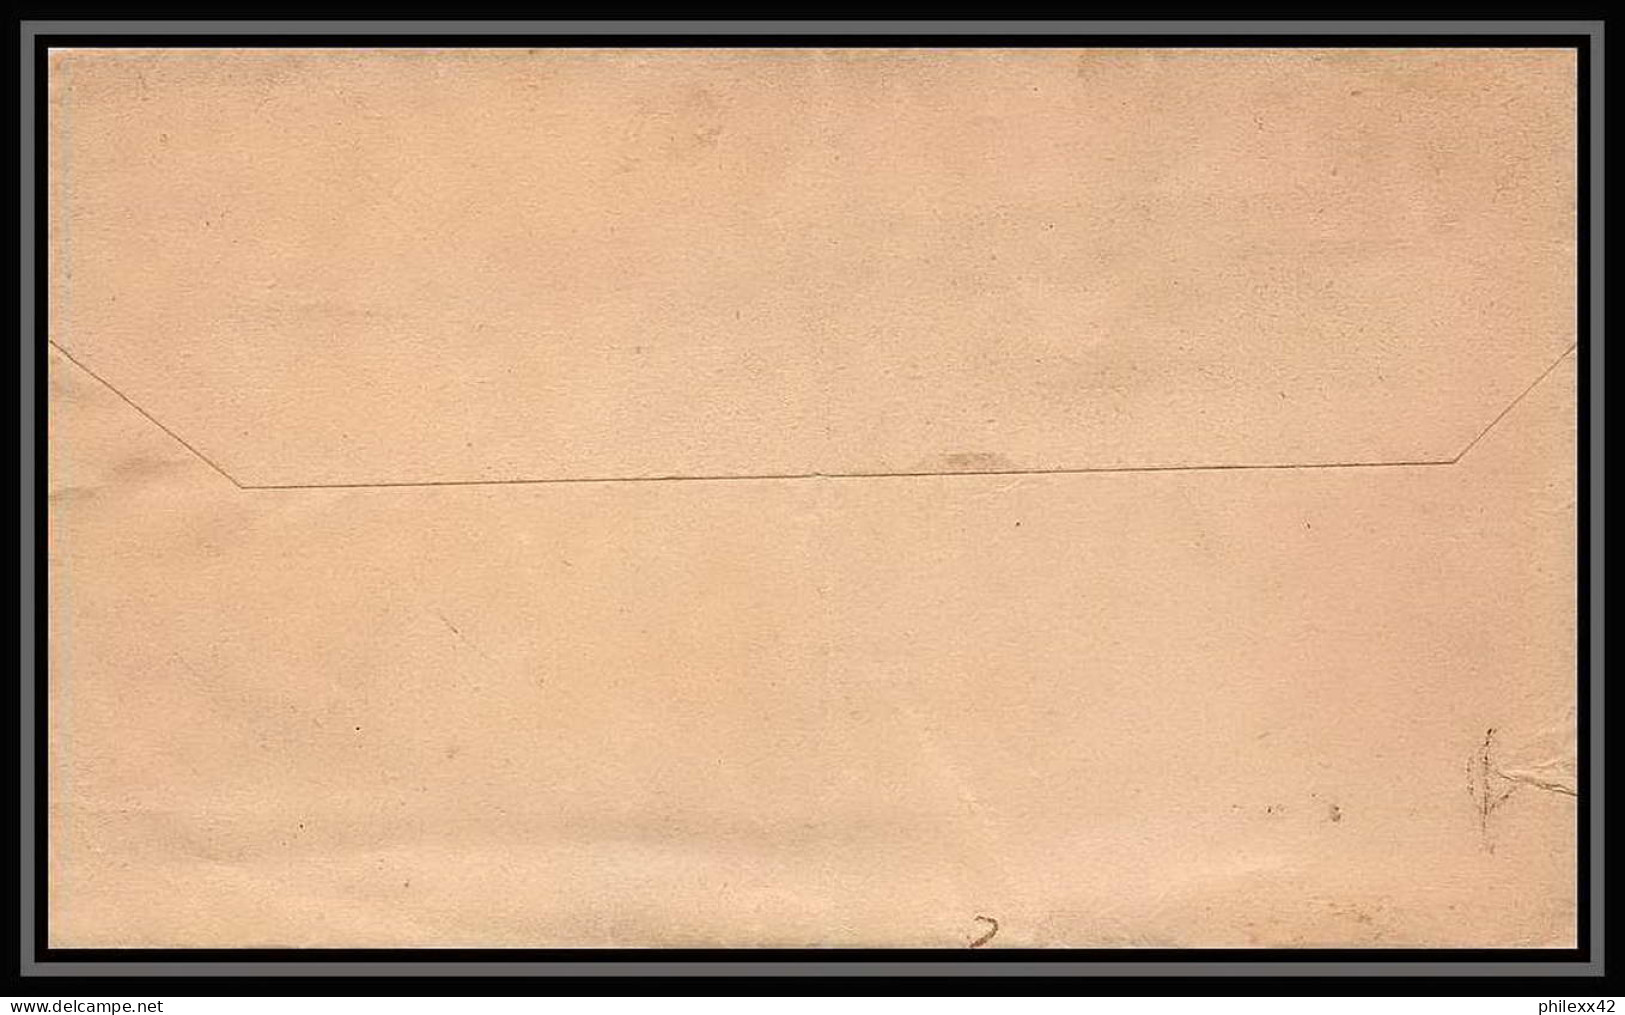 4208/ Argentine (Argentina) Entier Stationery Bande Pour Journal Newspapers Wrapper N°8 1889 - Entiers Postaux